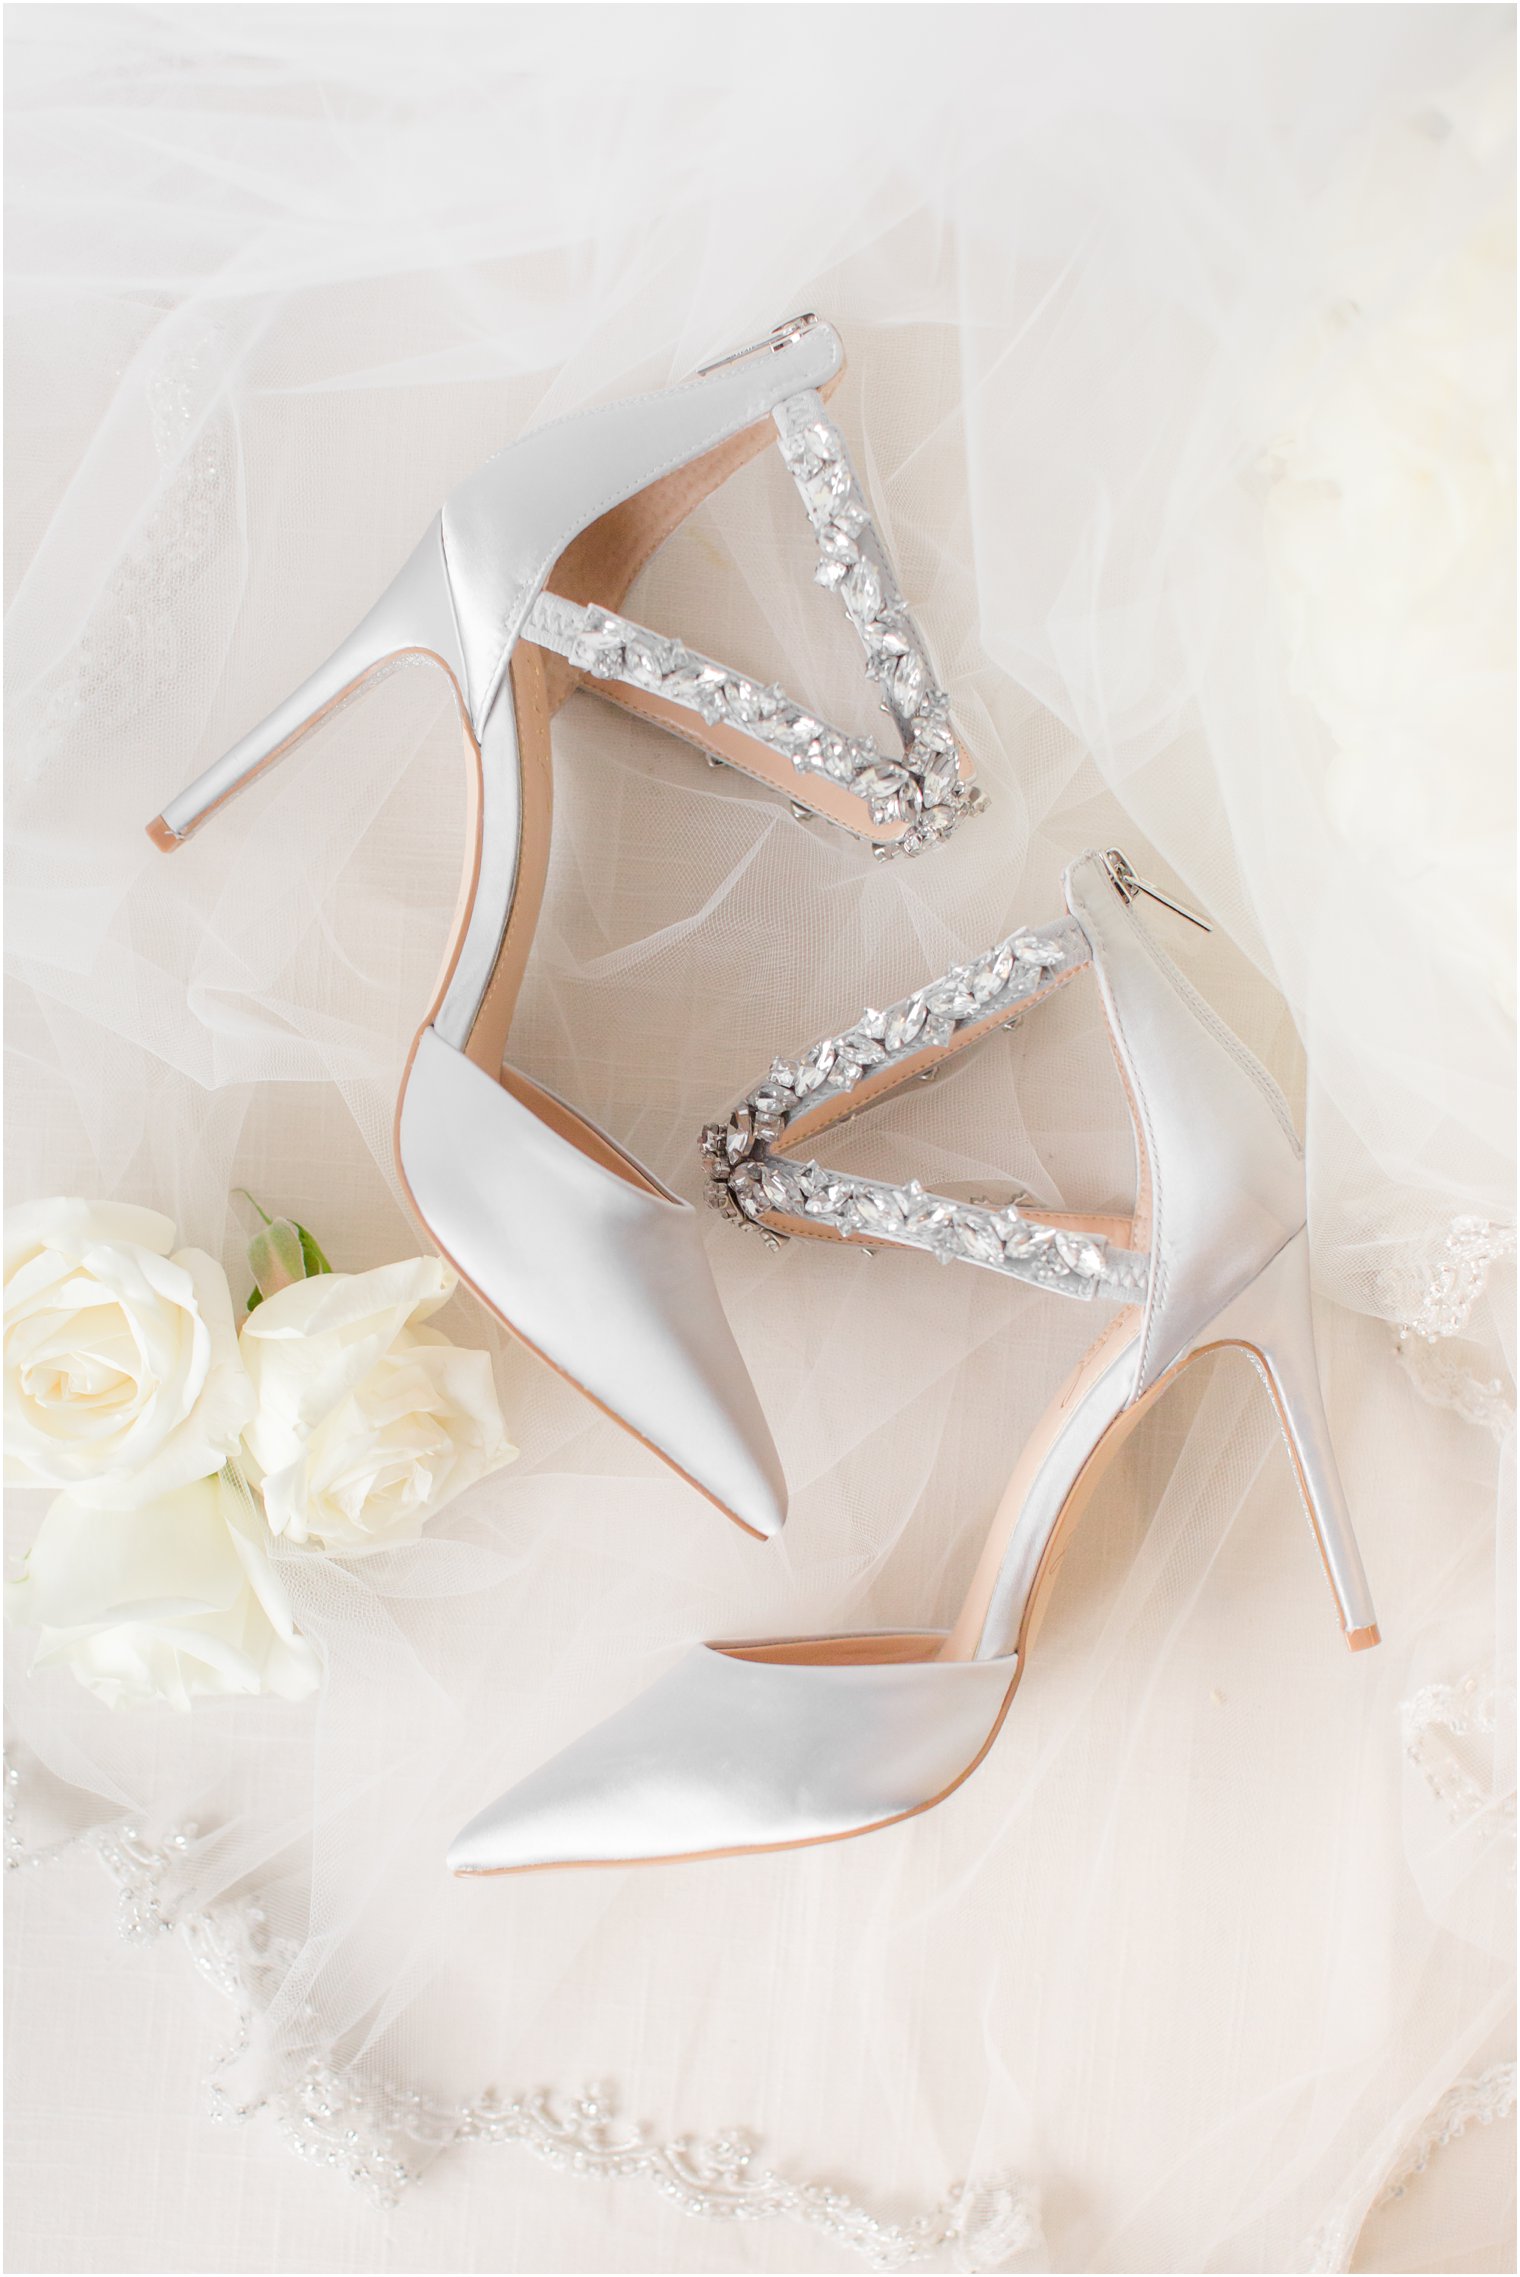 Badgley Mischka shoes for wedding day at Park Chateau Estate